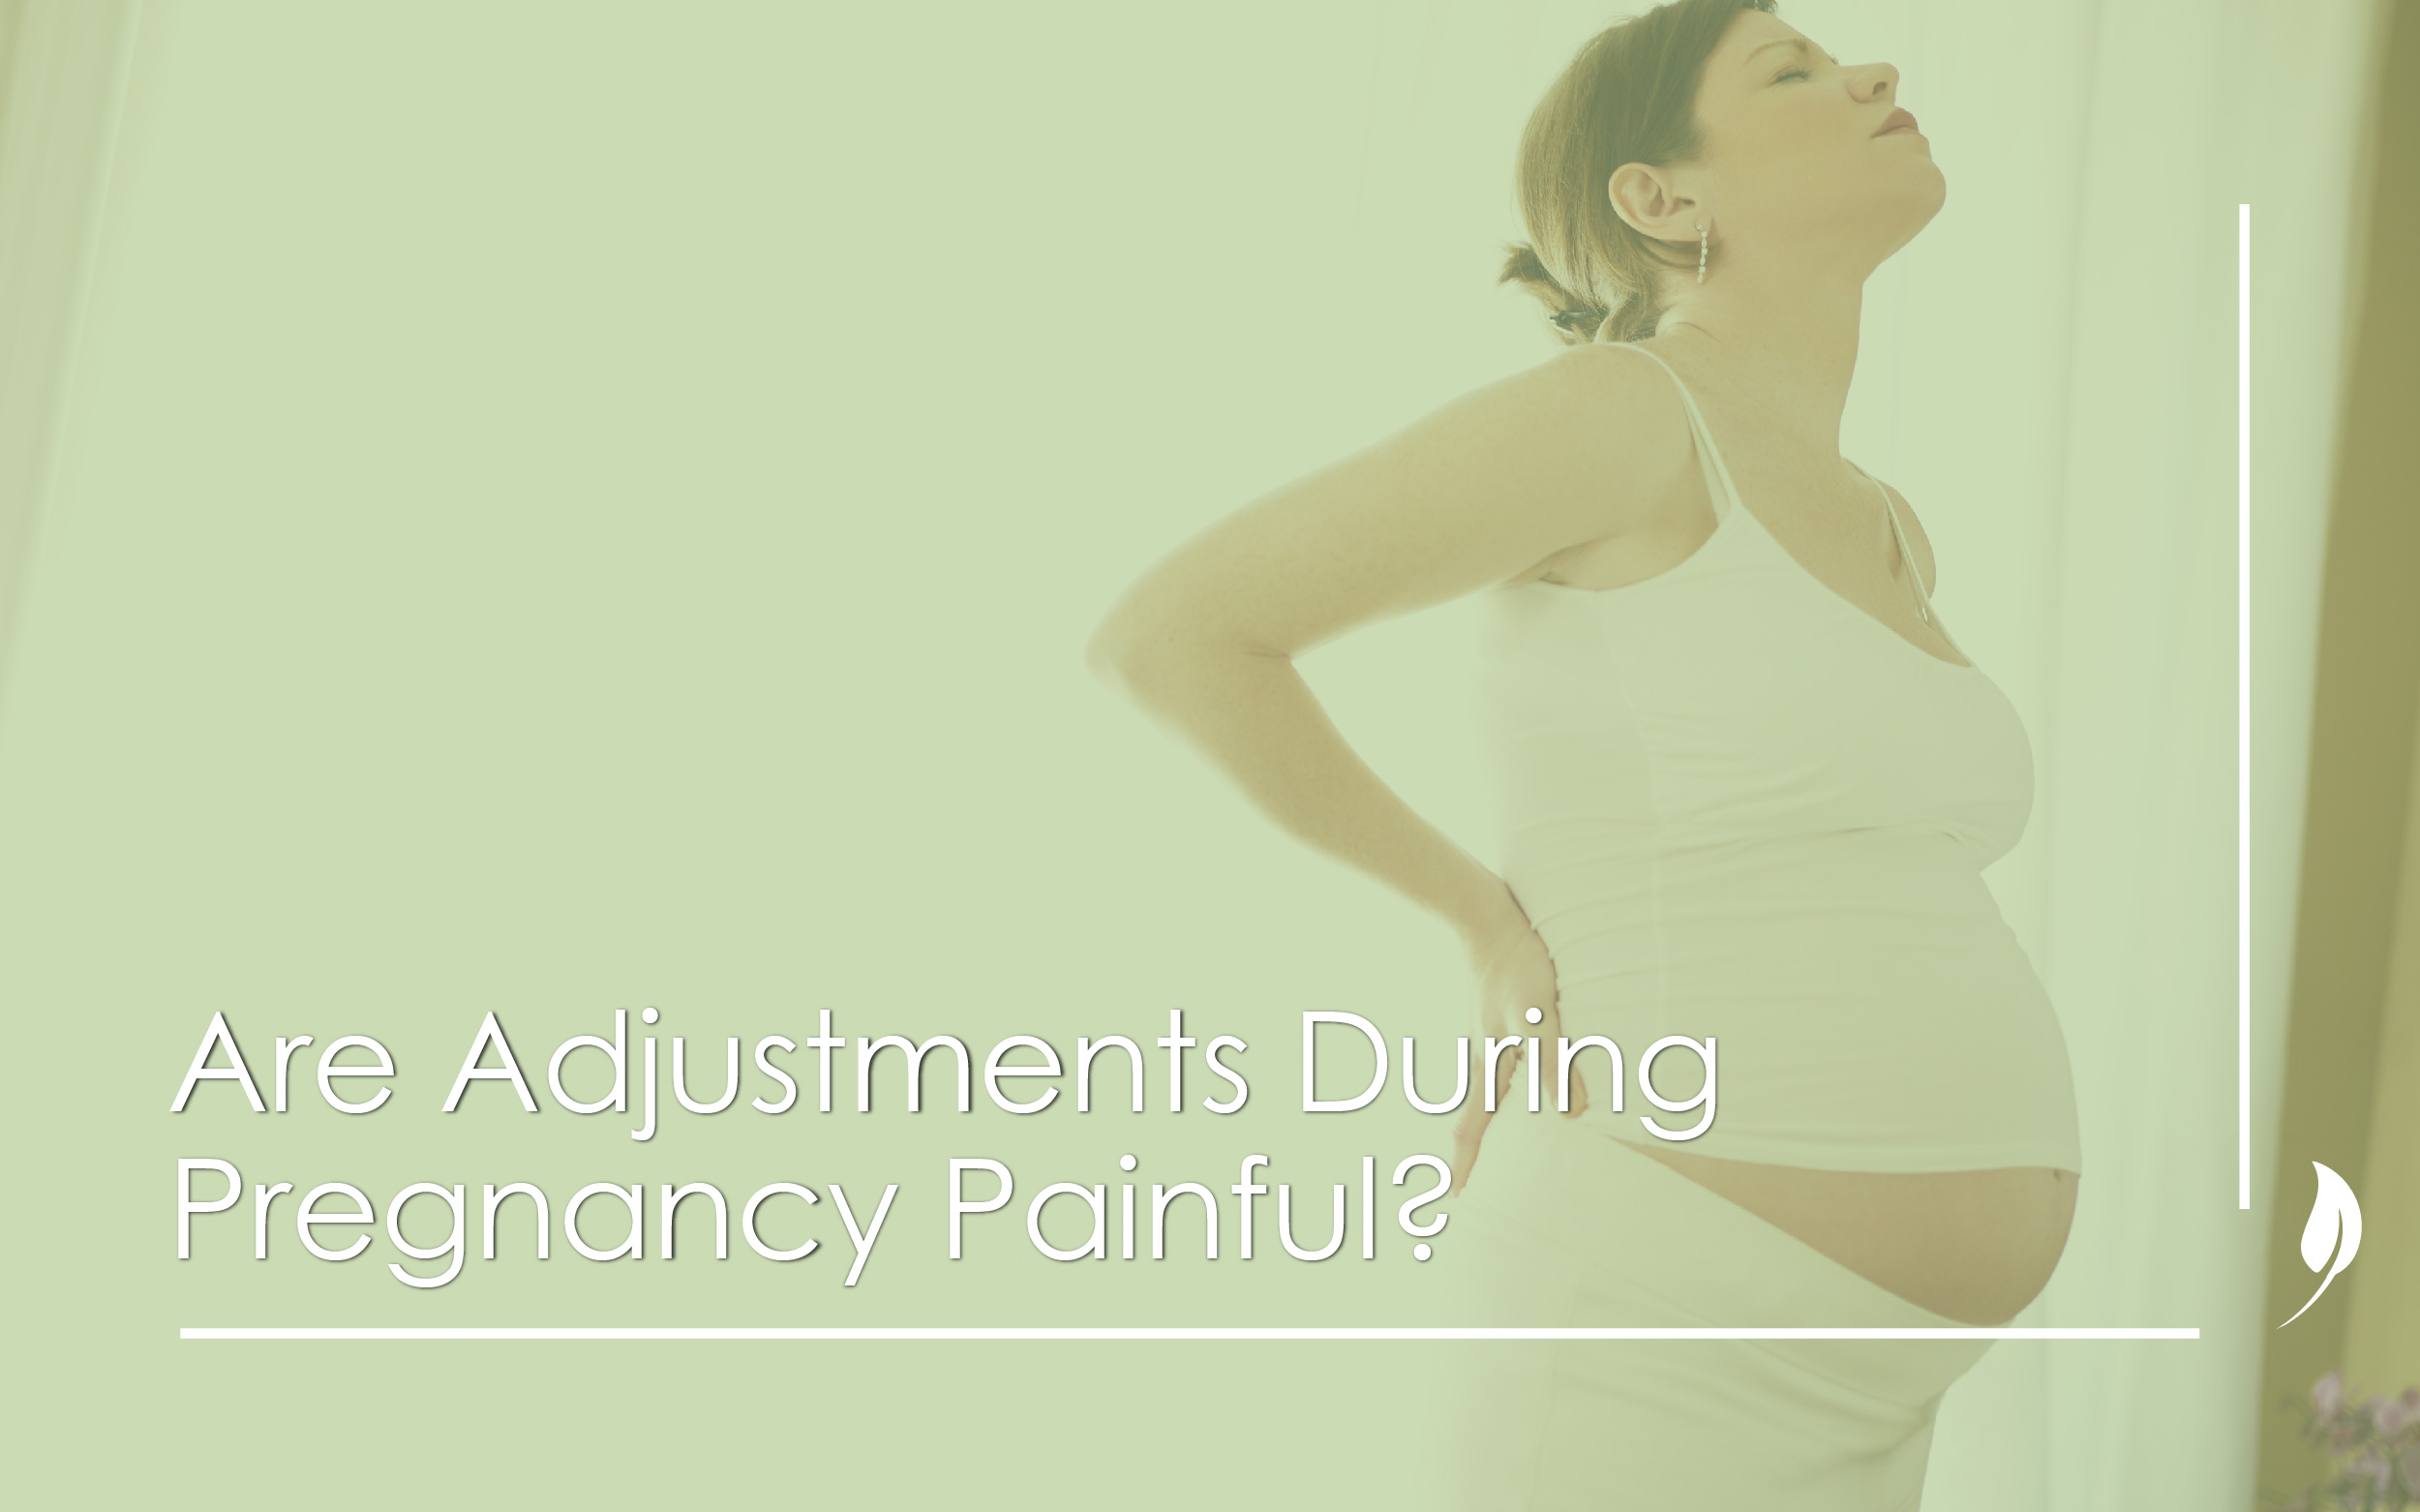 Are Adjustments During Pregnancy Painful?